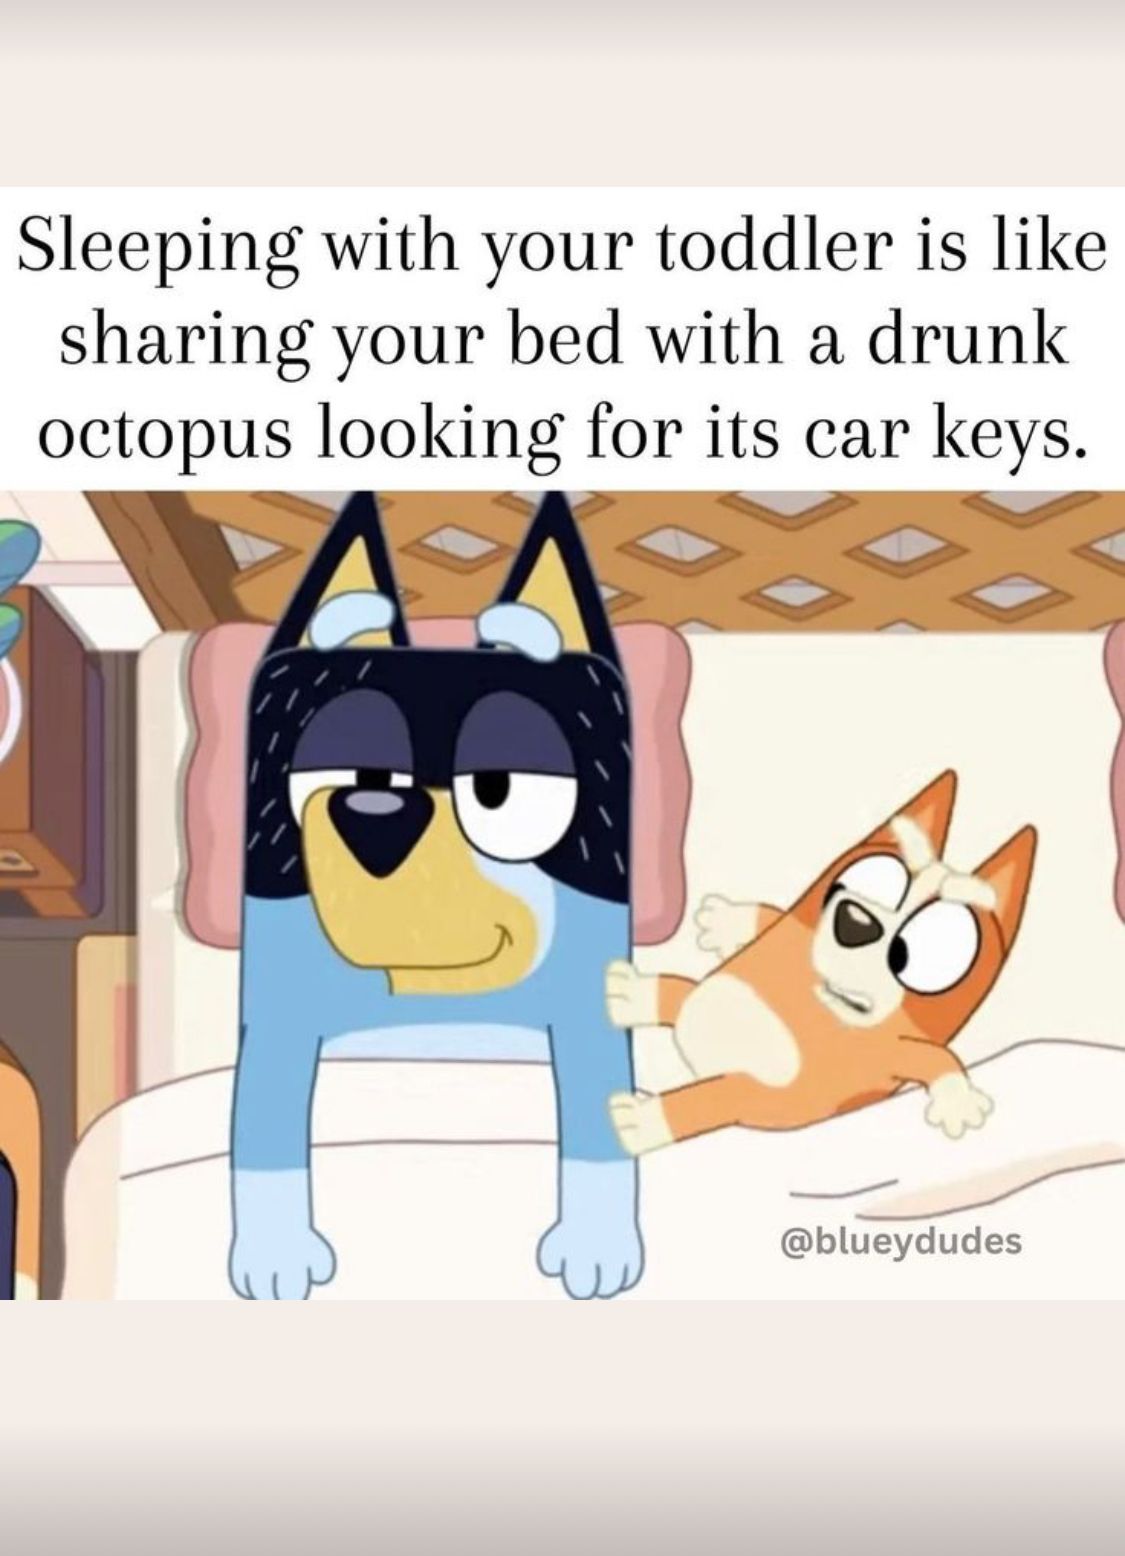 Sleeping with your toddler is like
sharing your bed with a drunk
octopus looking for its car keys.
3
@blueydudes